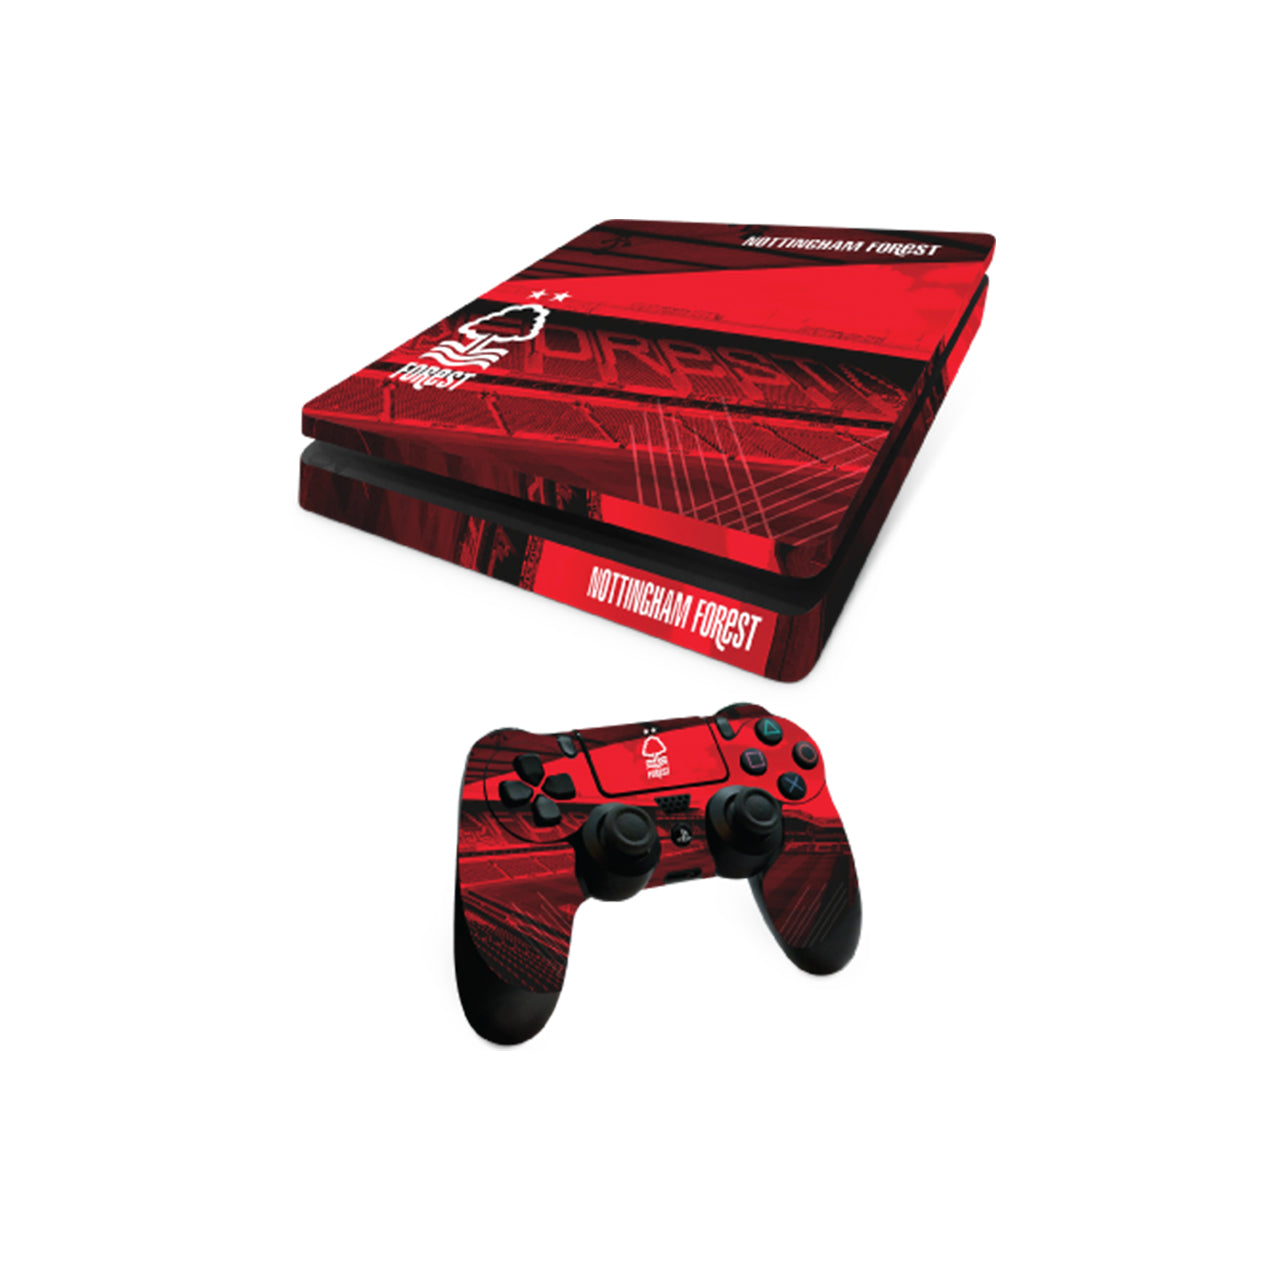 Nffc Ps4 Slim Console And Controller Skin Bundle Nottingham Forest Fc